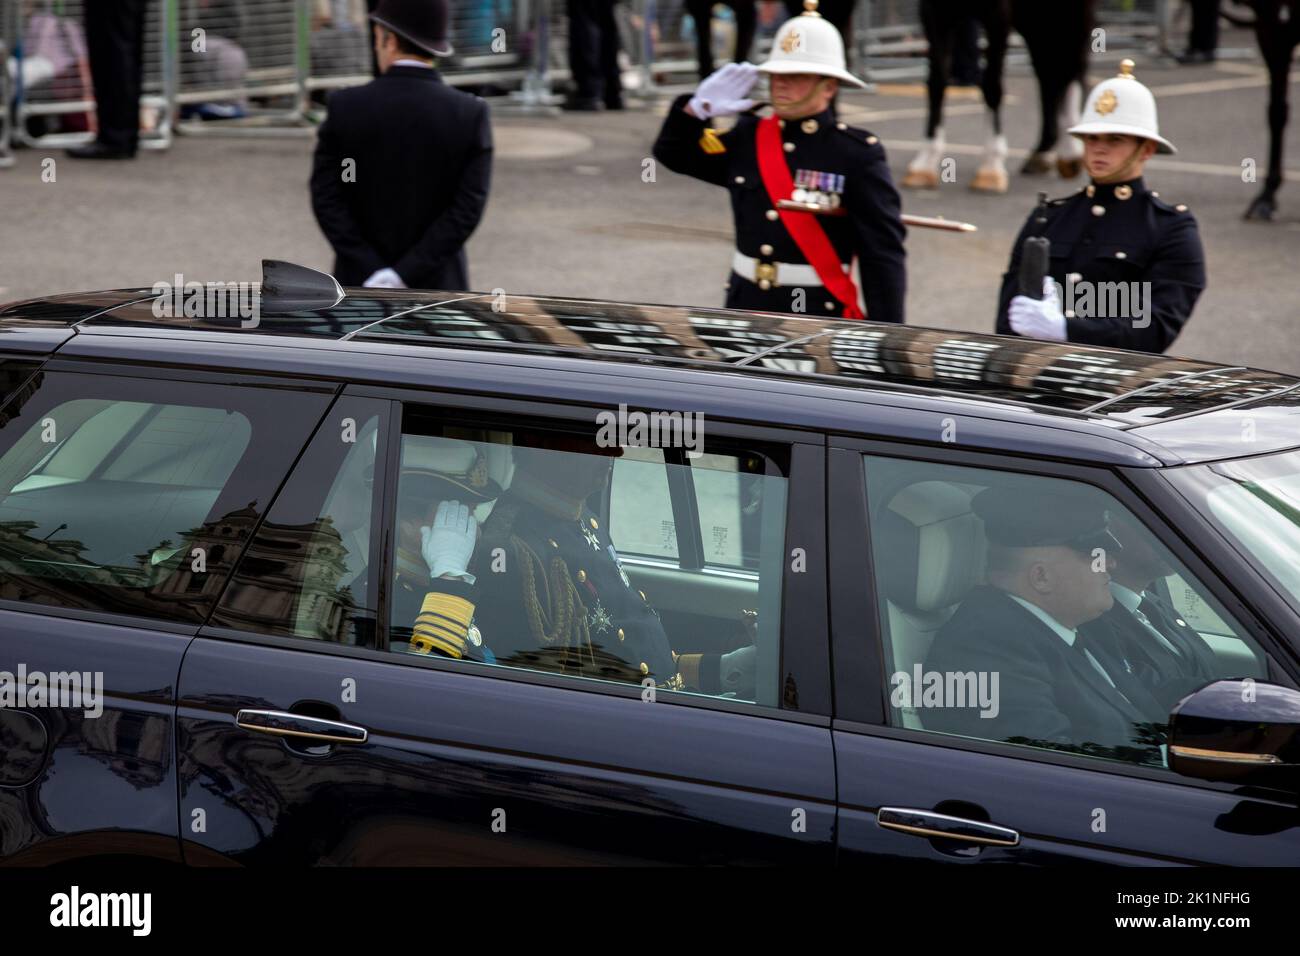 London, England. 19th September, 2022. Princess Anne arrives for the State Funeral of her mother, Queen Elizabeth II at Westminster AbbeyCredit: Kiki Streitberger / Alamy Live News. Stock Photo